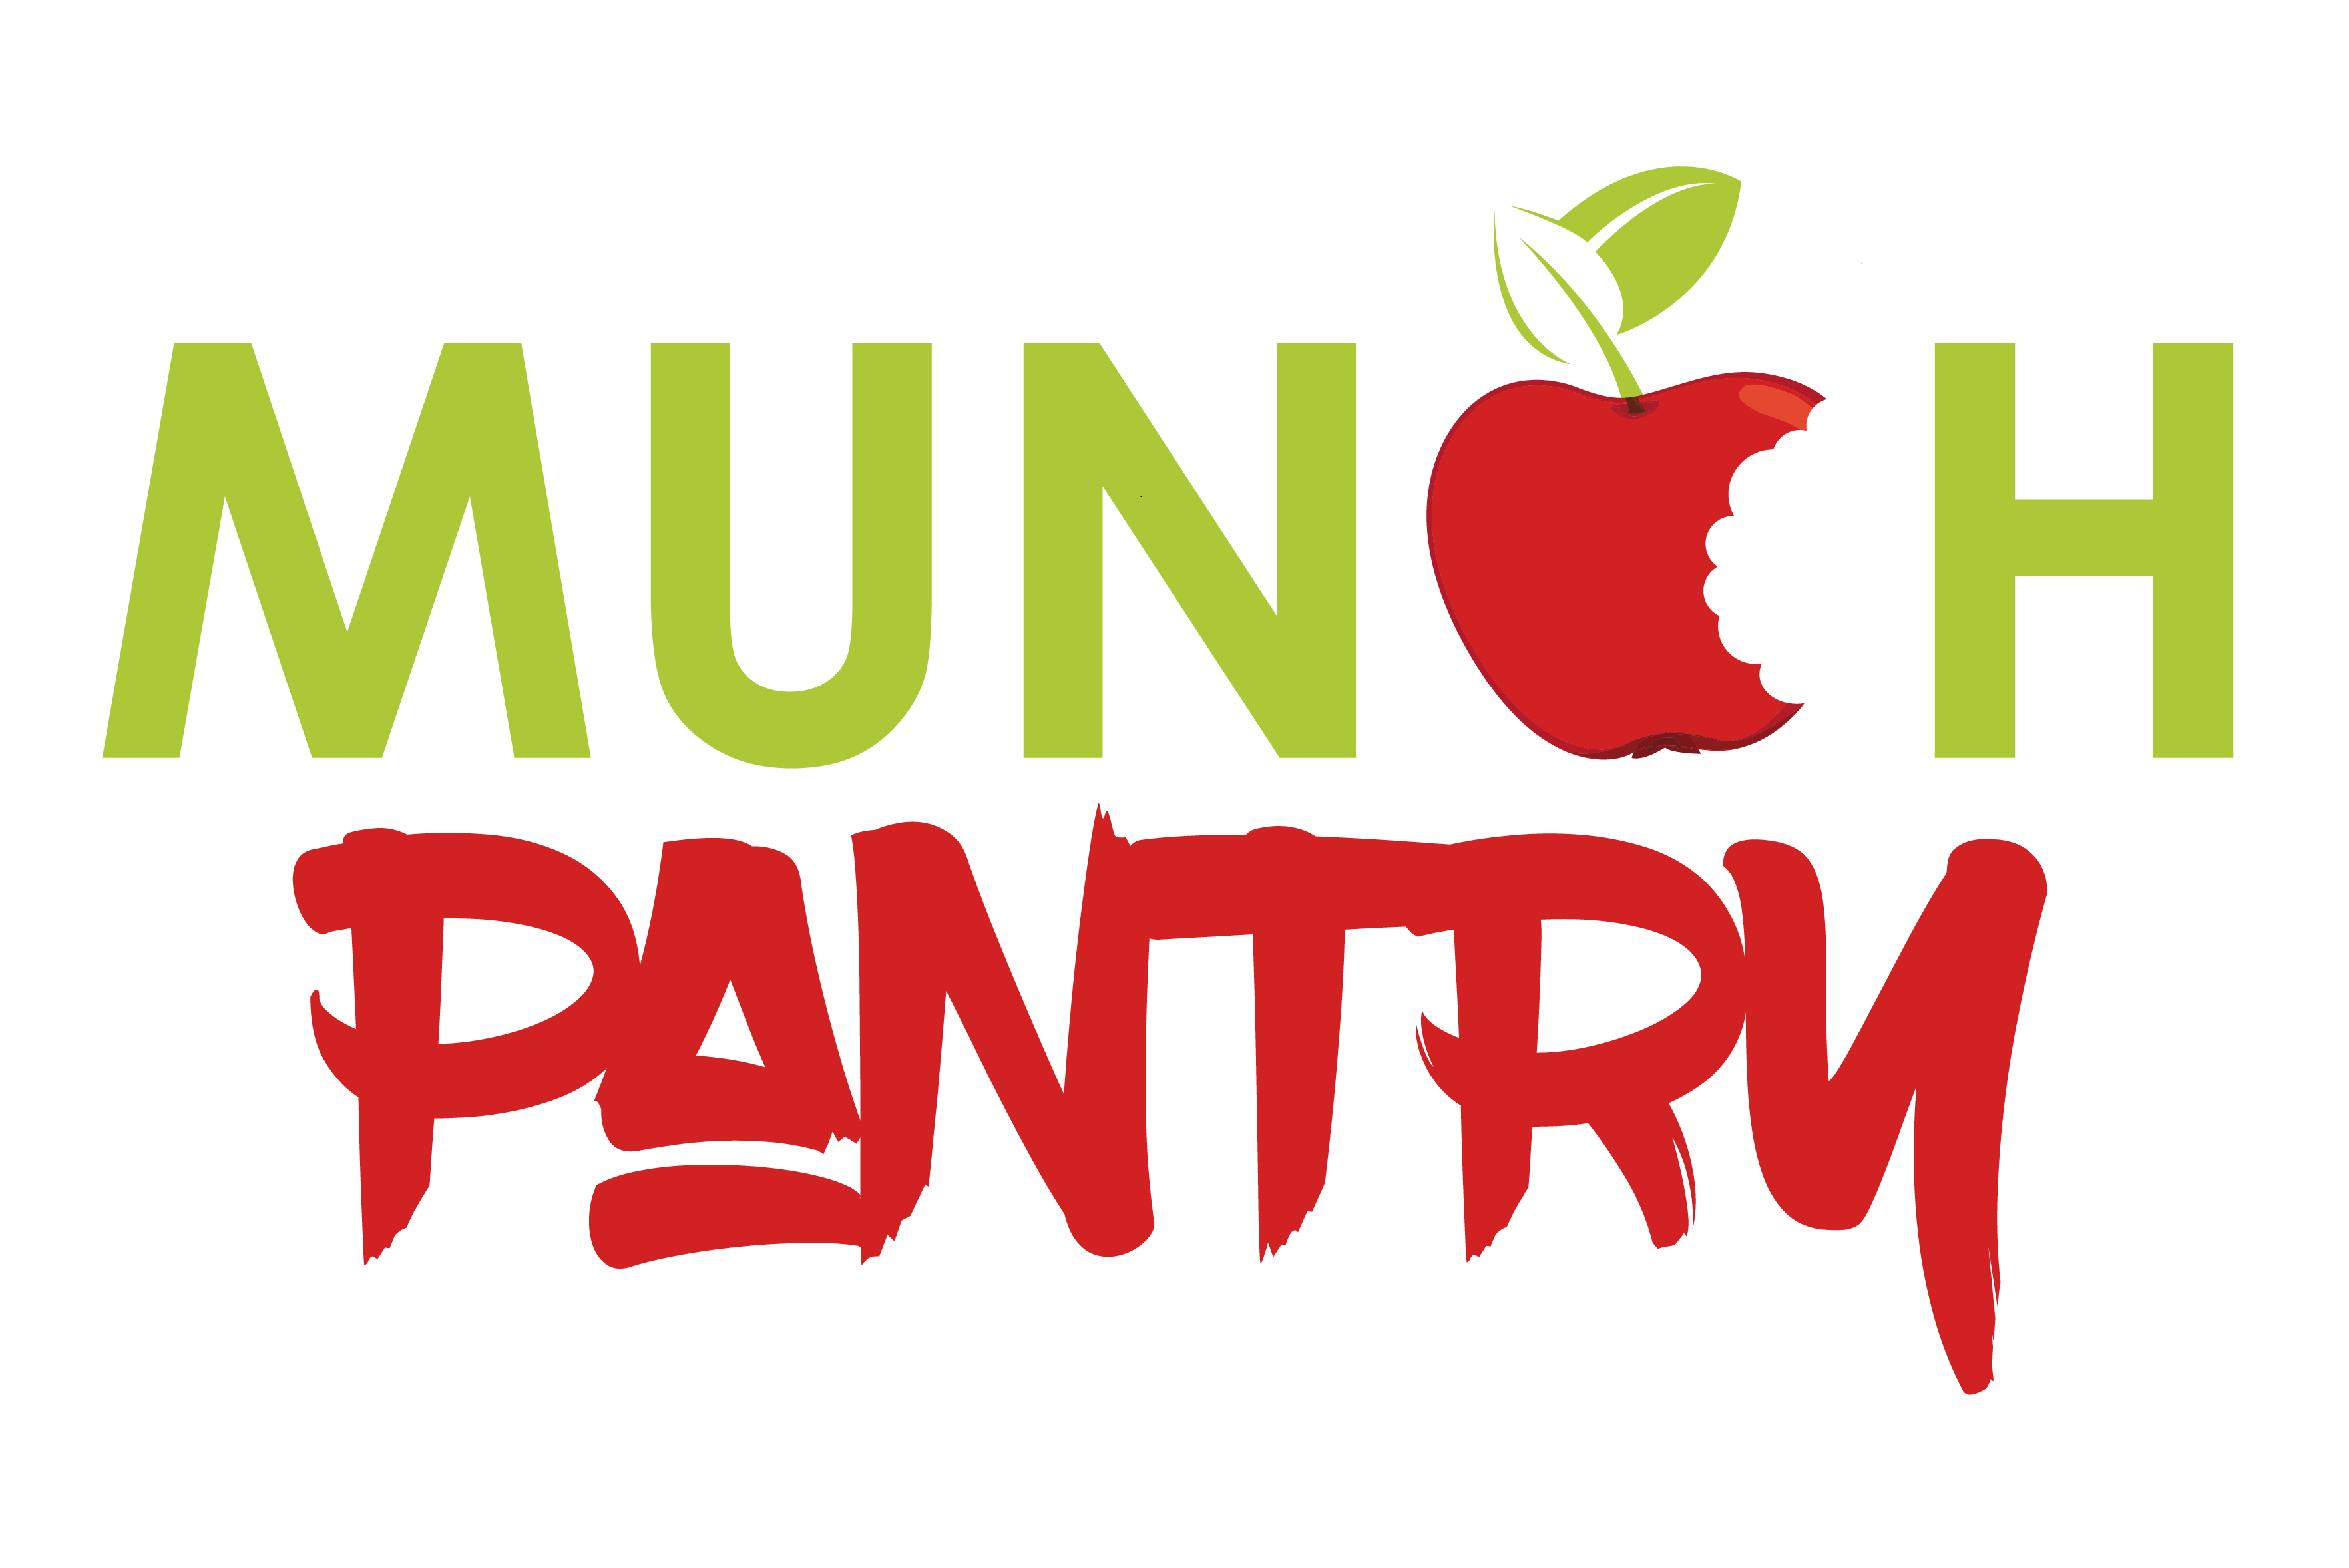 MUNCH Pantry a helping hand not a hand out